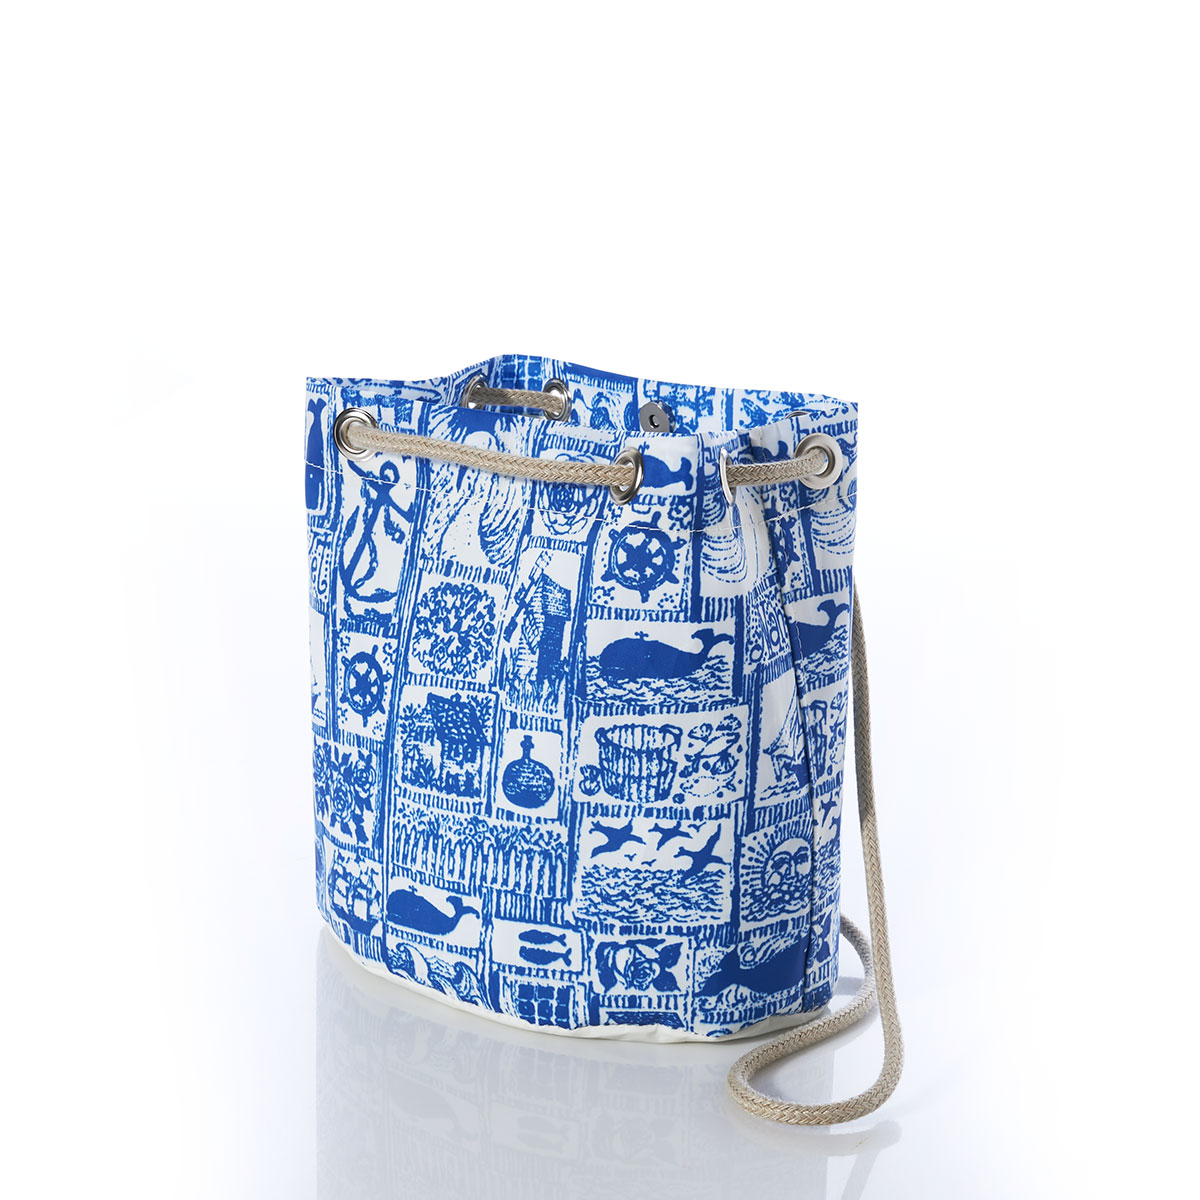 open top view of blue squares filled with various nautical imagery printed on recycled sail cloth convertible bucket bag with hemp dock line straps